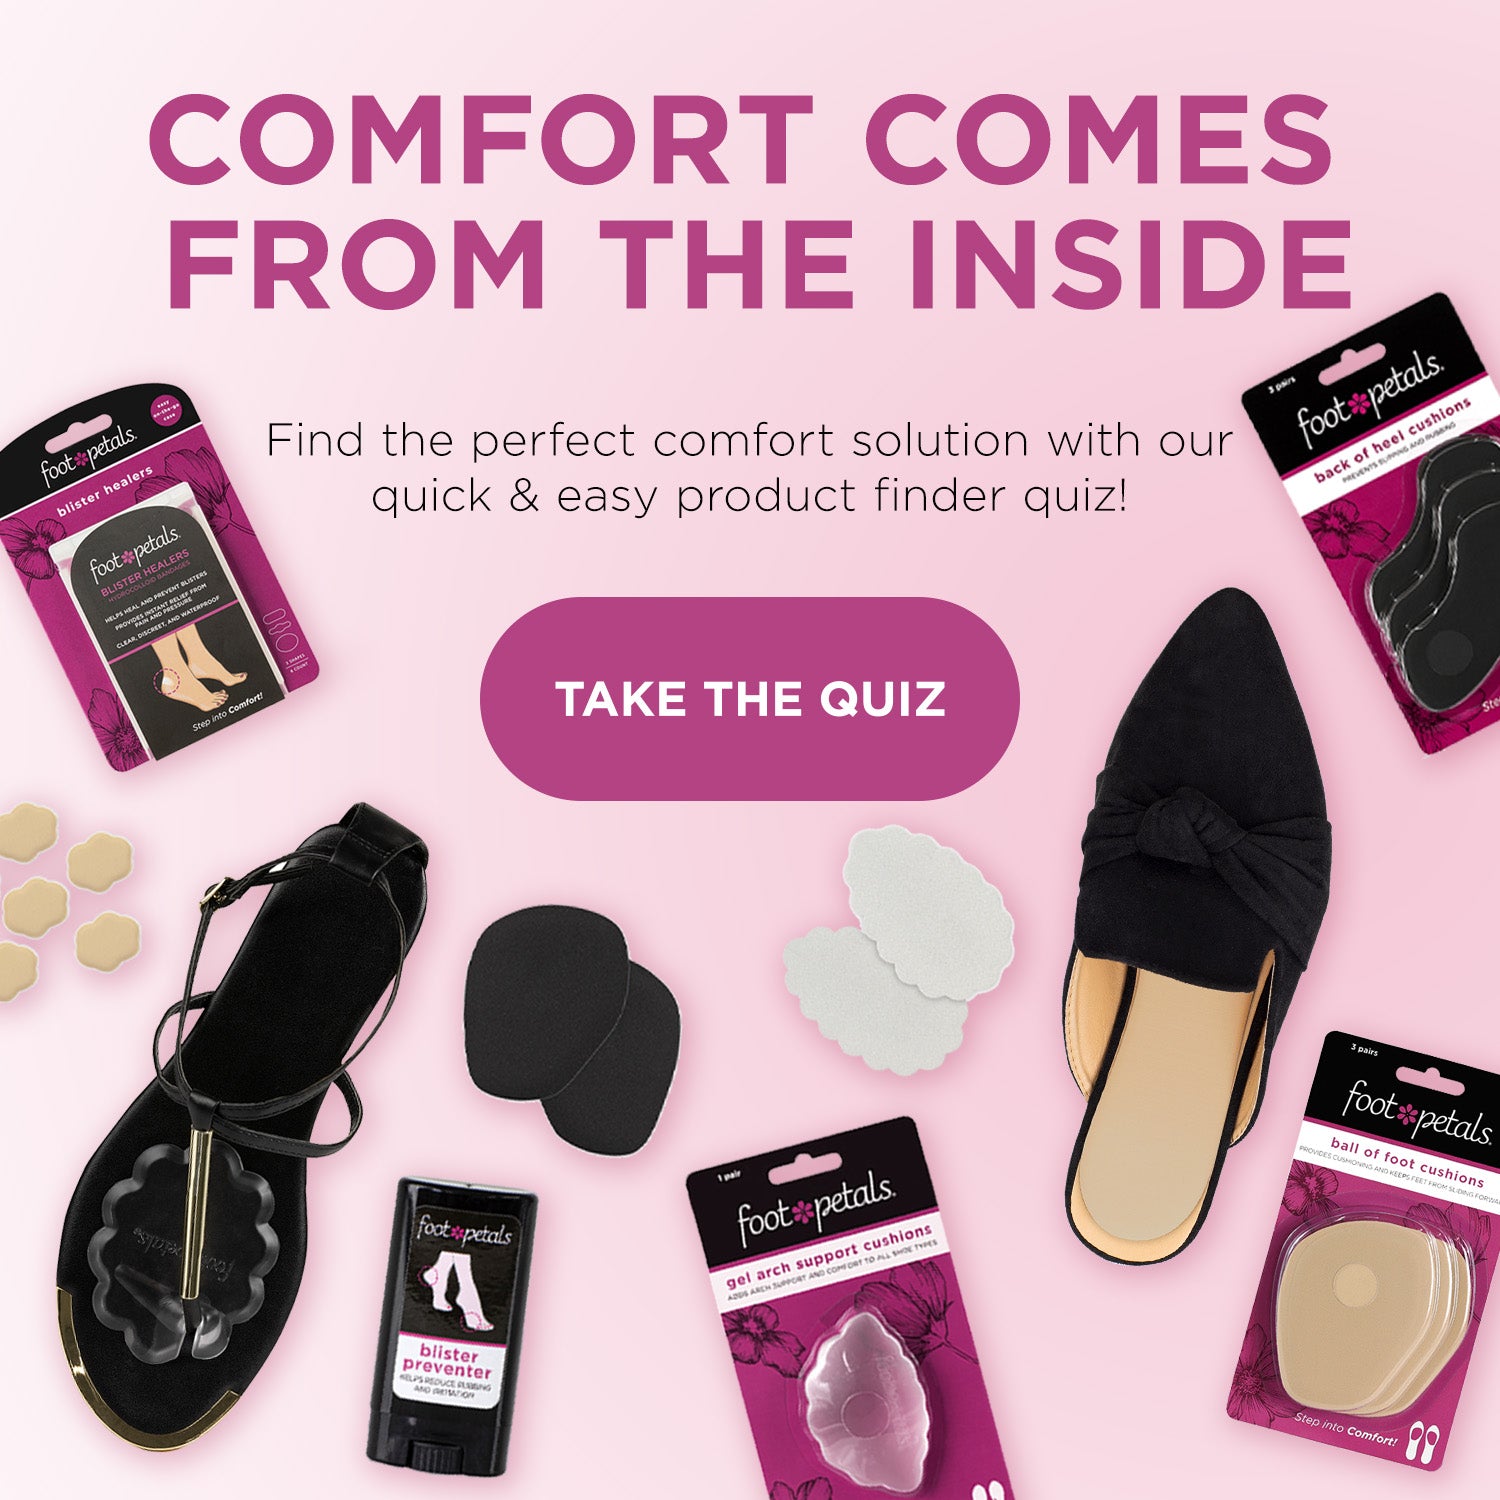 Comfort Comes from the Inside. Find the perfect comfort solution with our quick and easy product finder quiz!